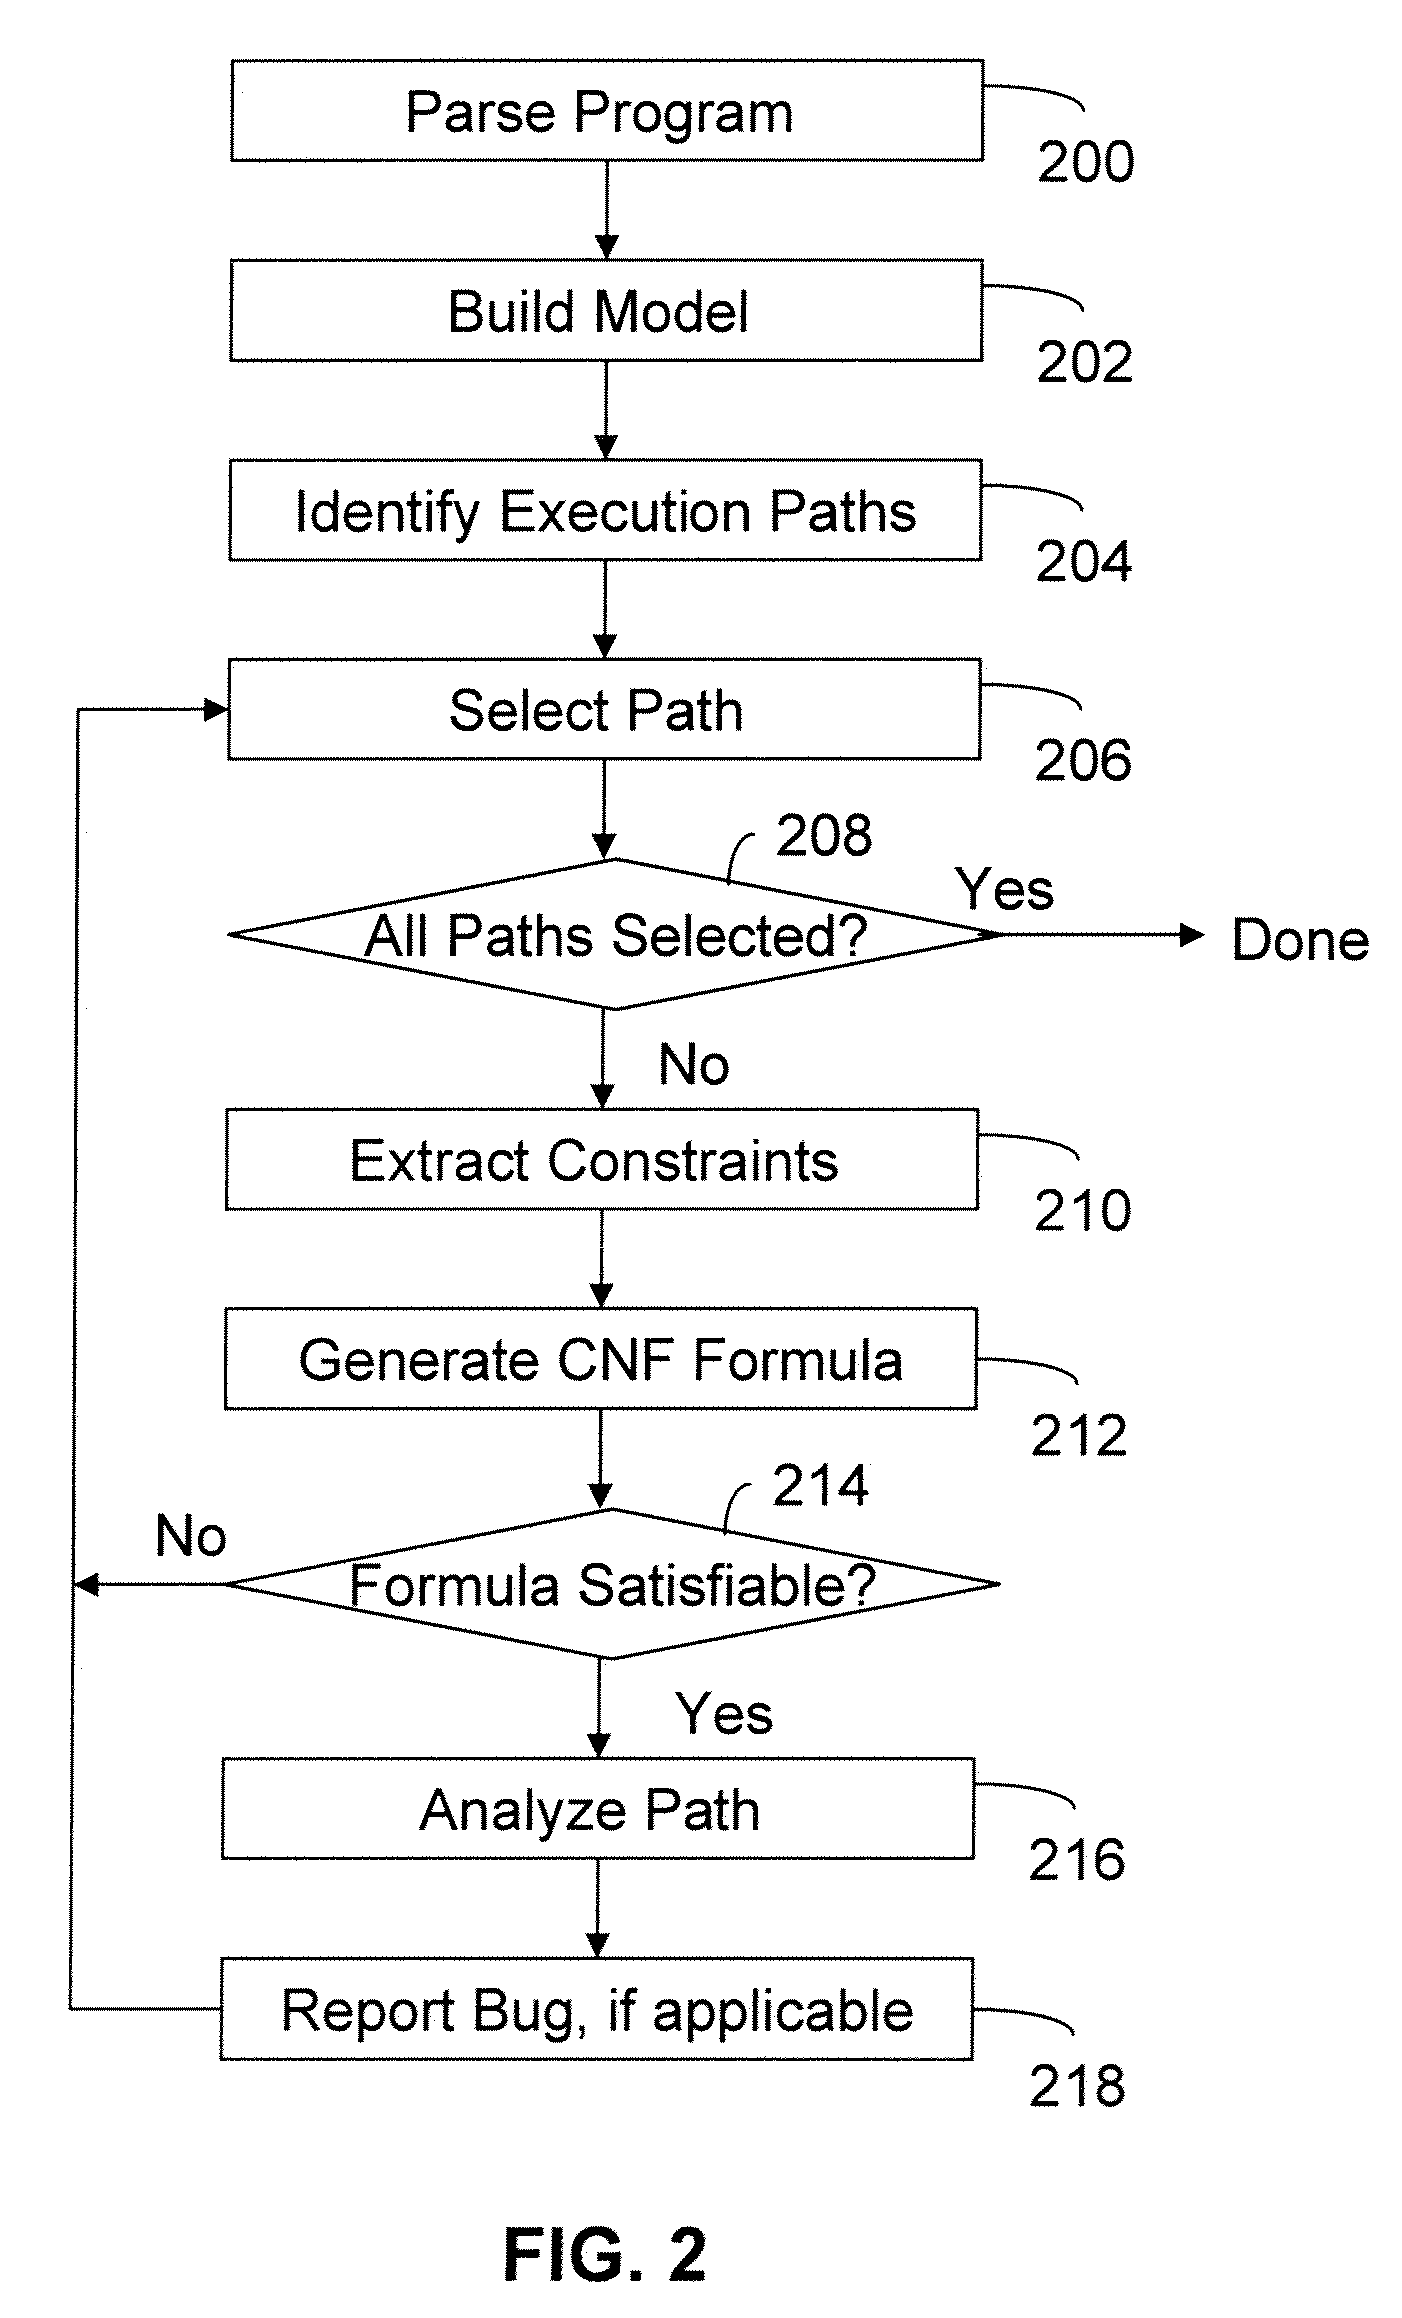 Apparatus and method for analyzing source code using path analysis and Boolean satisfiability